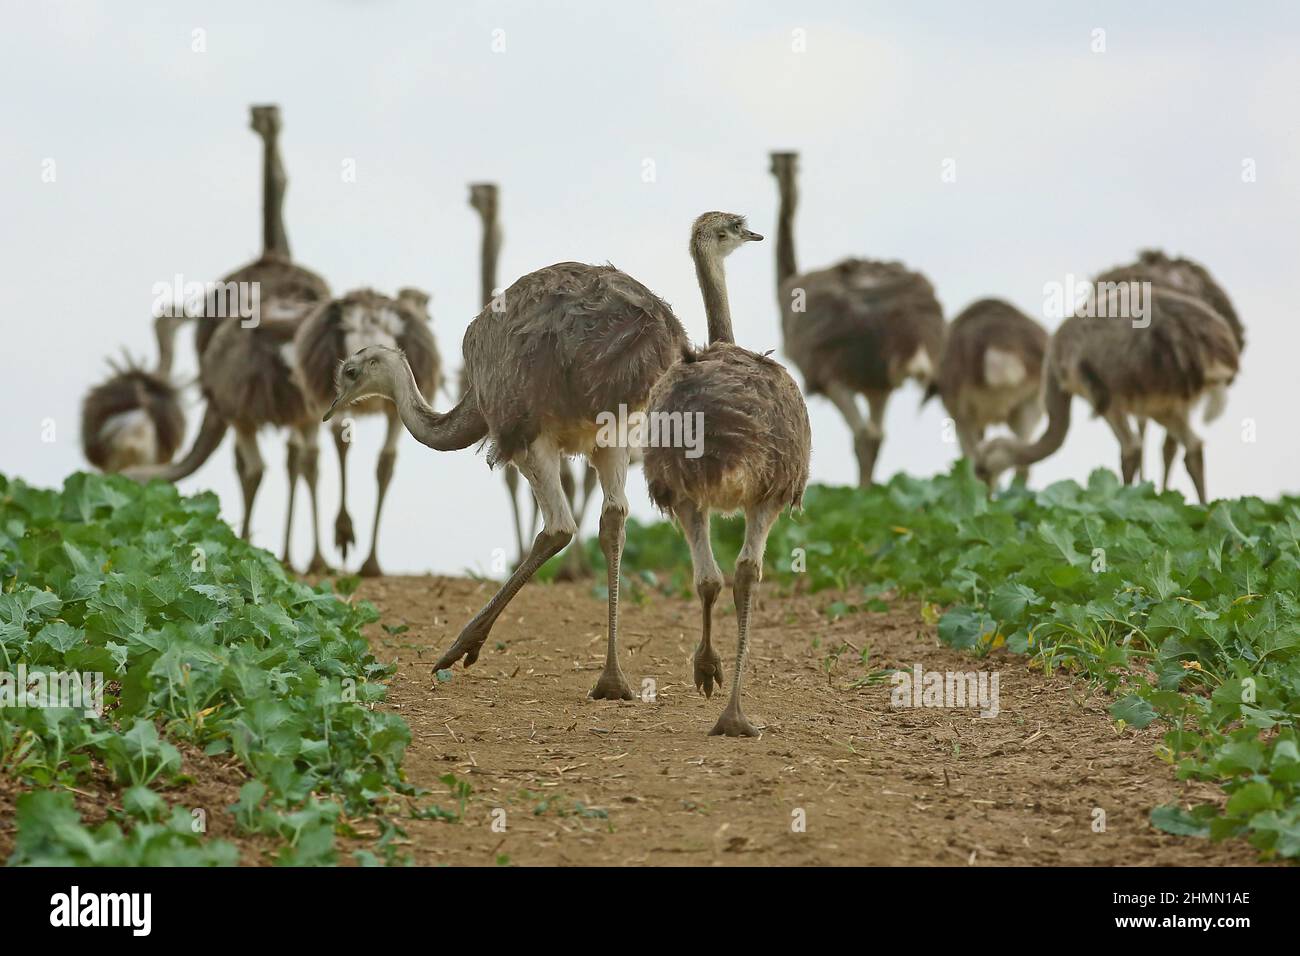 greater rhea (Rhea americana), Aduklts and juveniles foraging in a field landscape, Germany Stock Photo